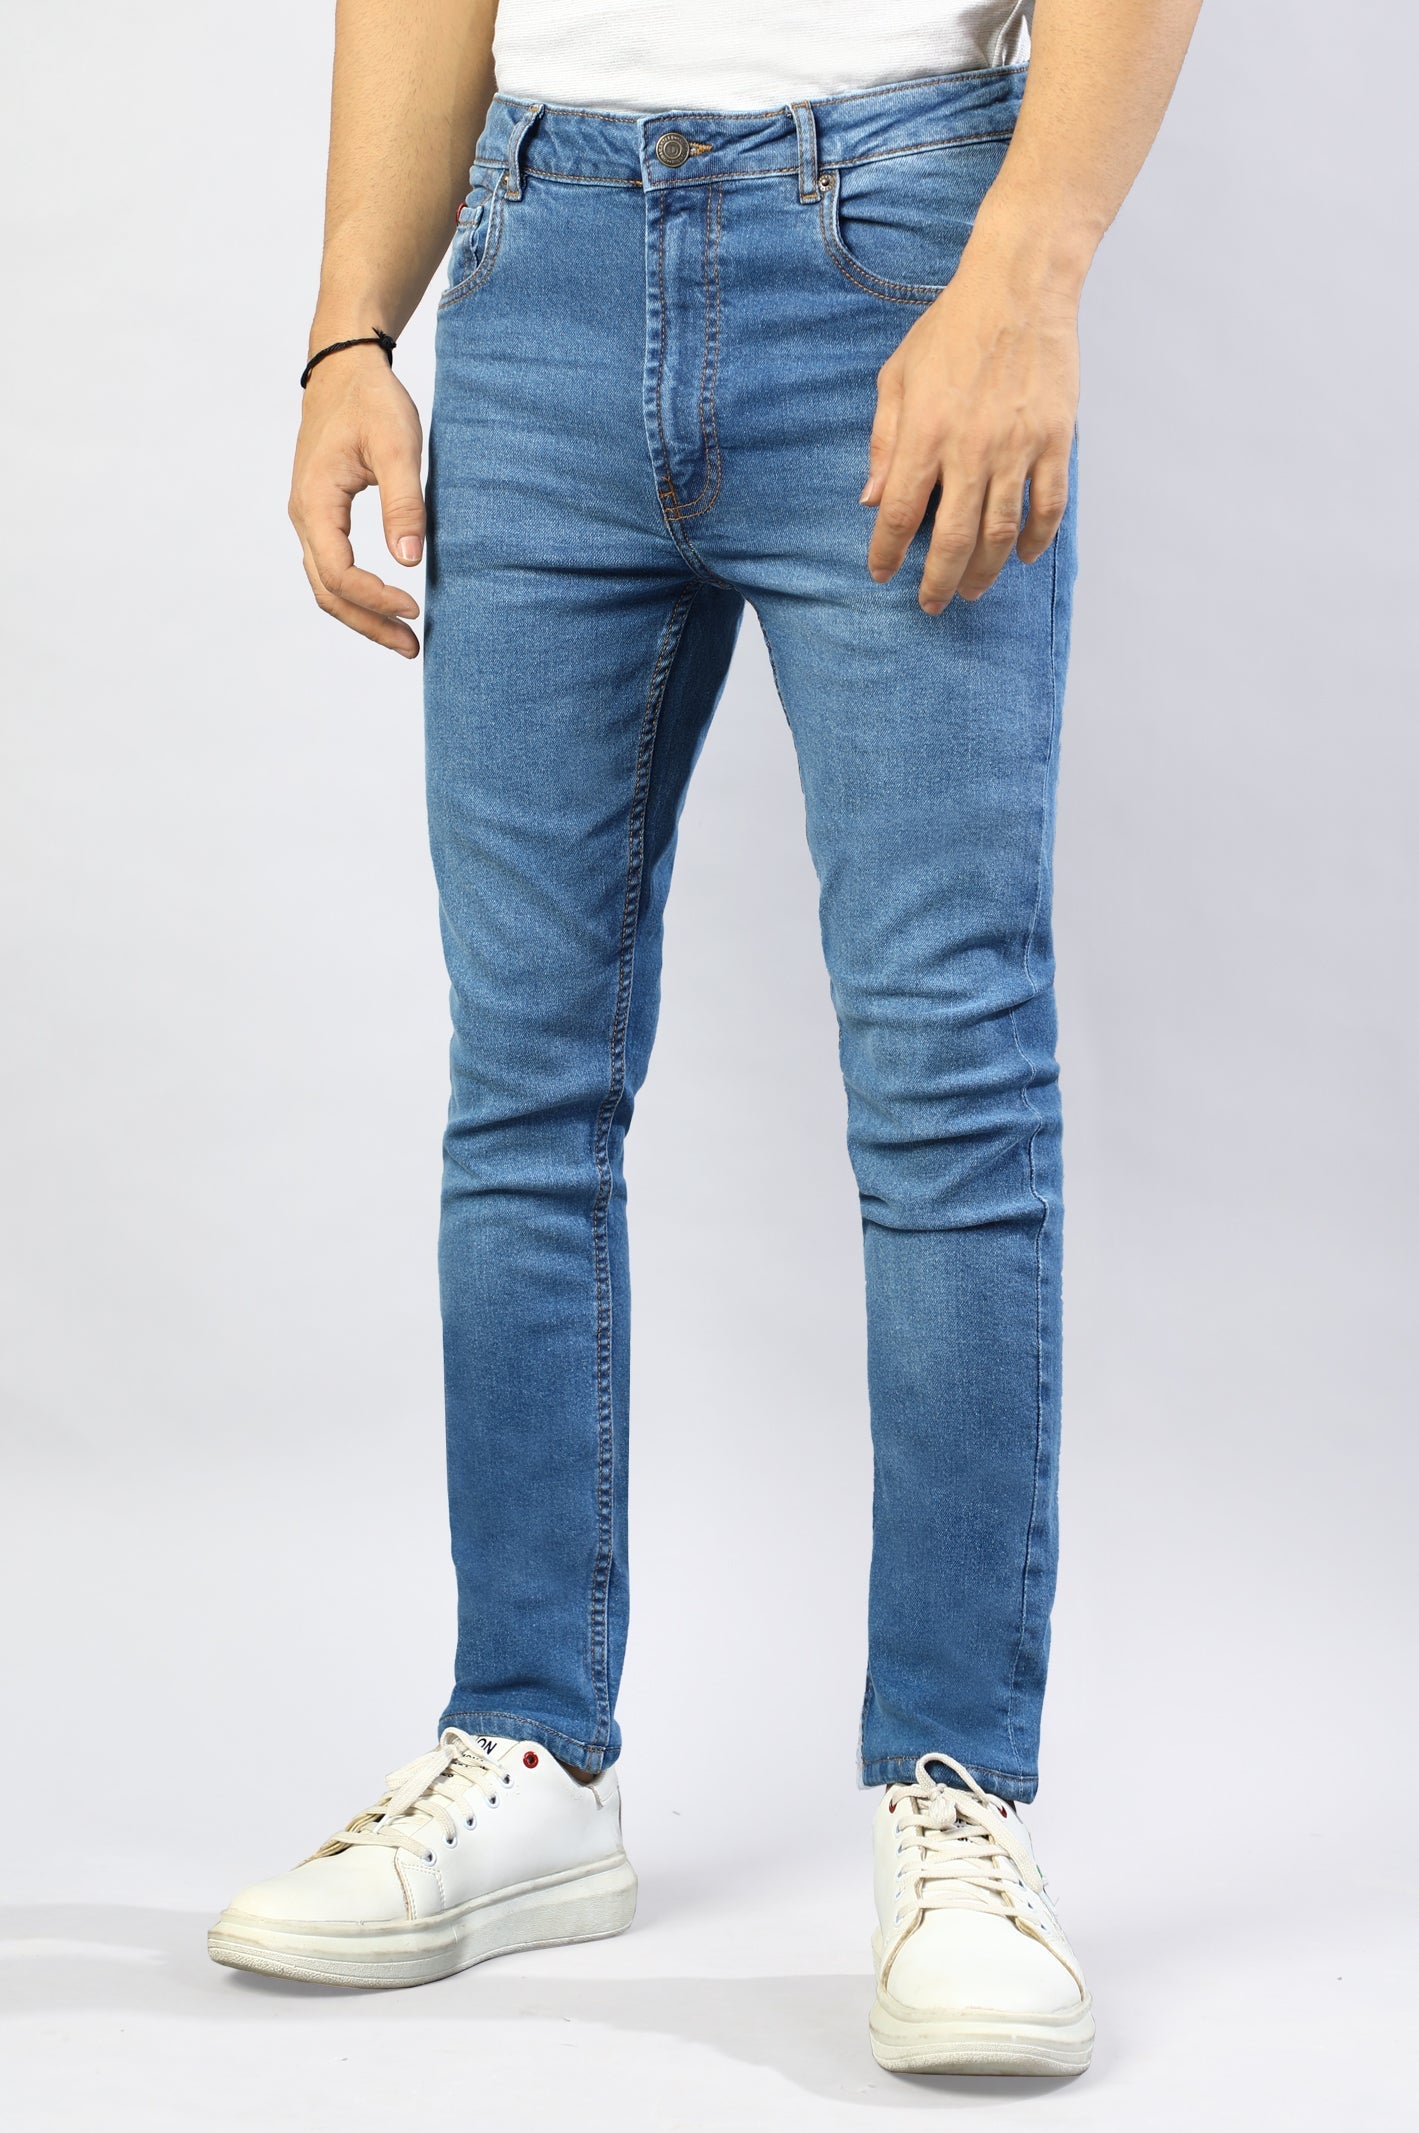 Blue Slim Fit Jeans From Diners